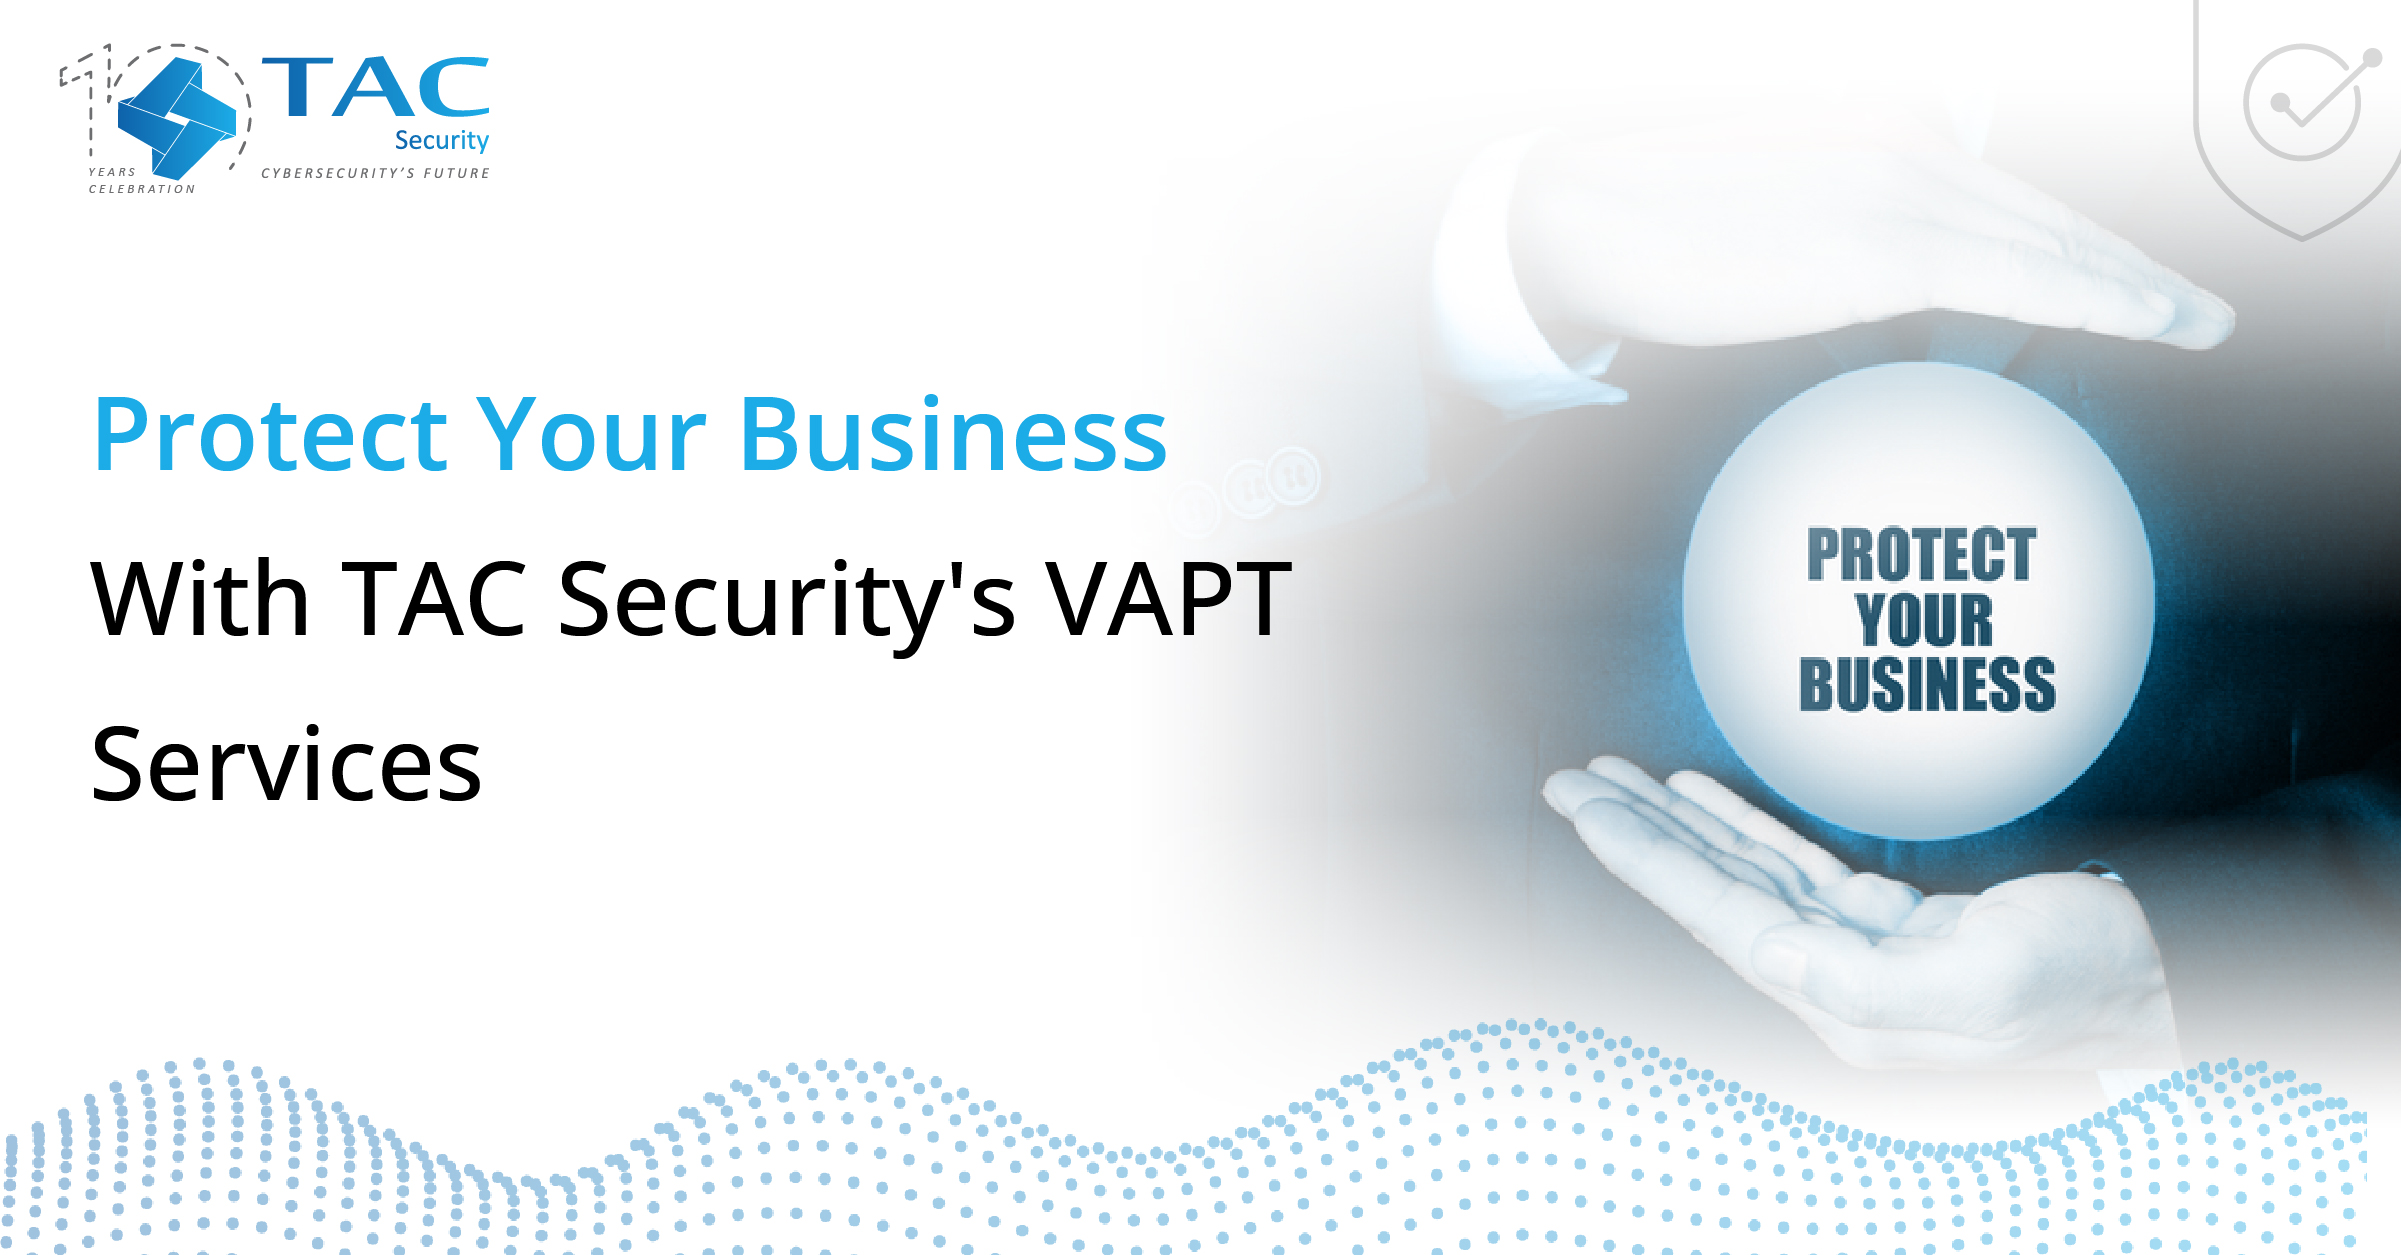 Protect your business with VAPT services